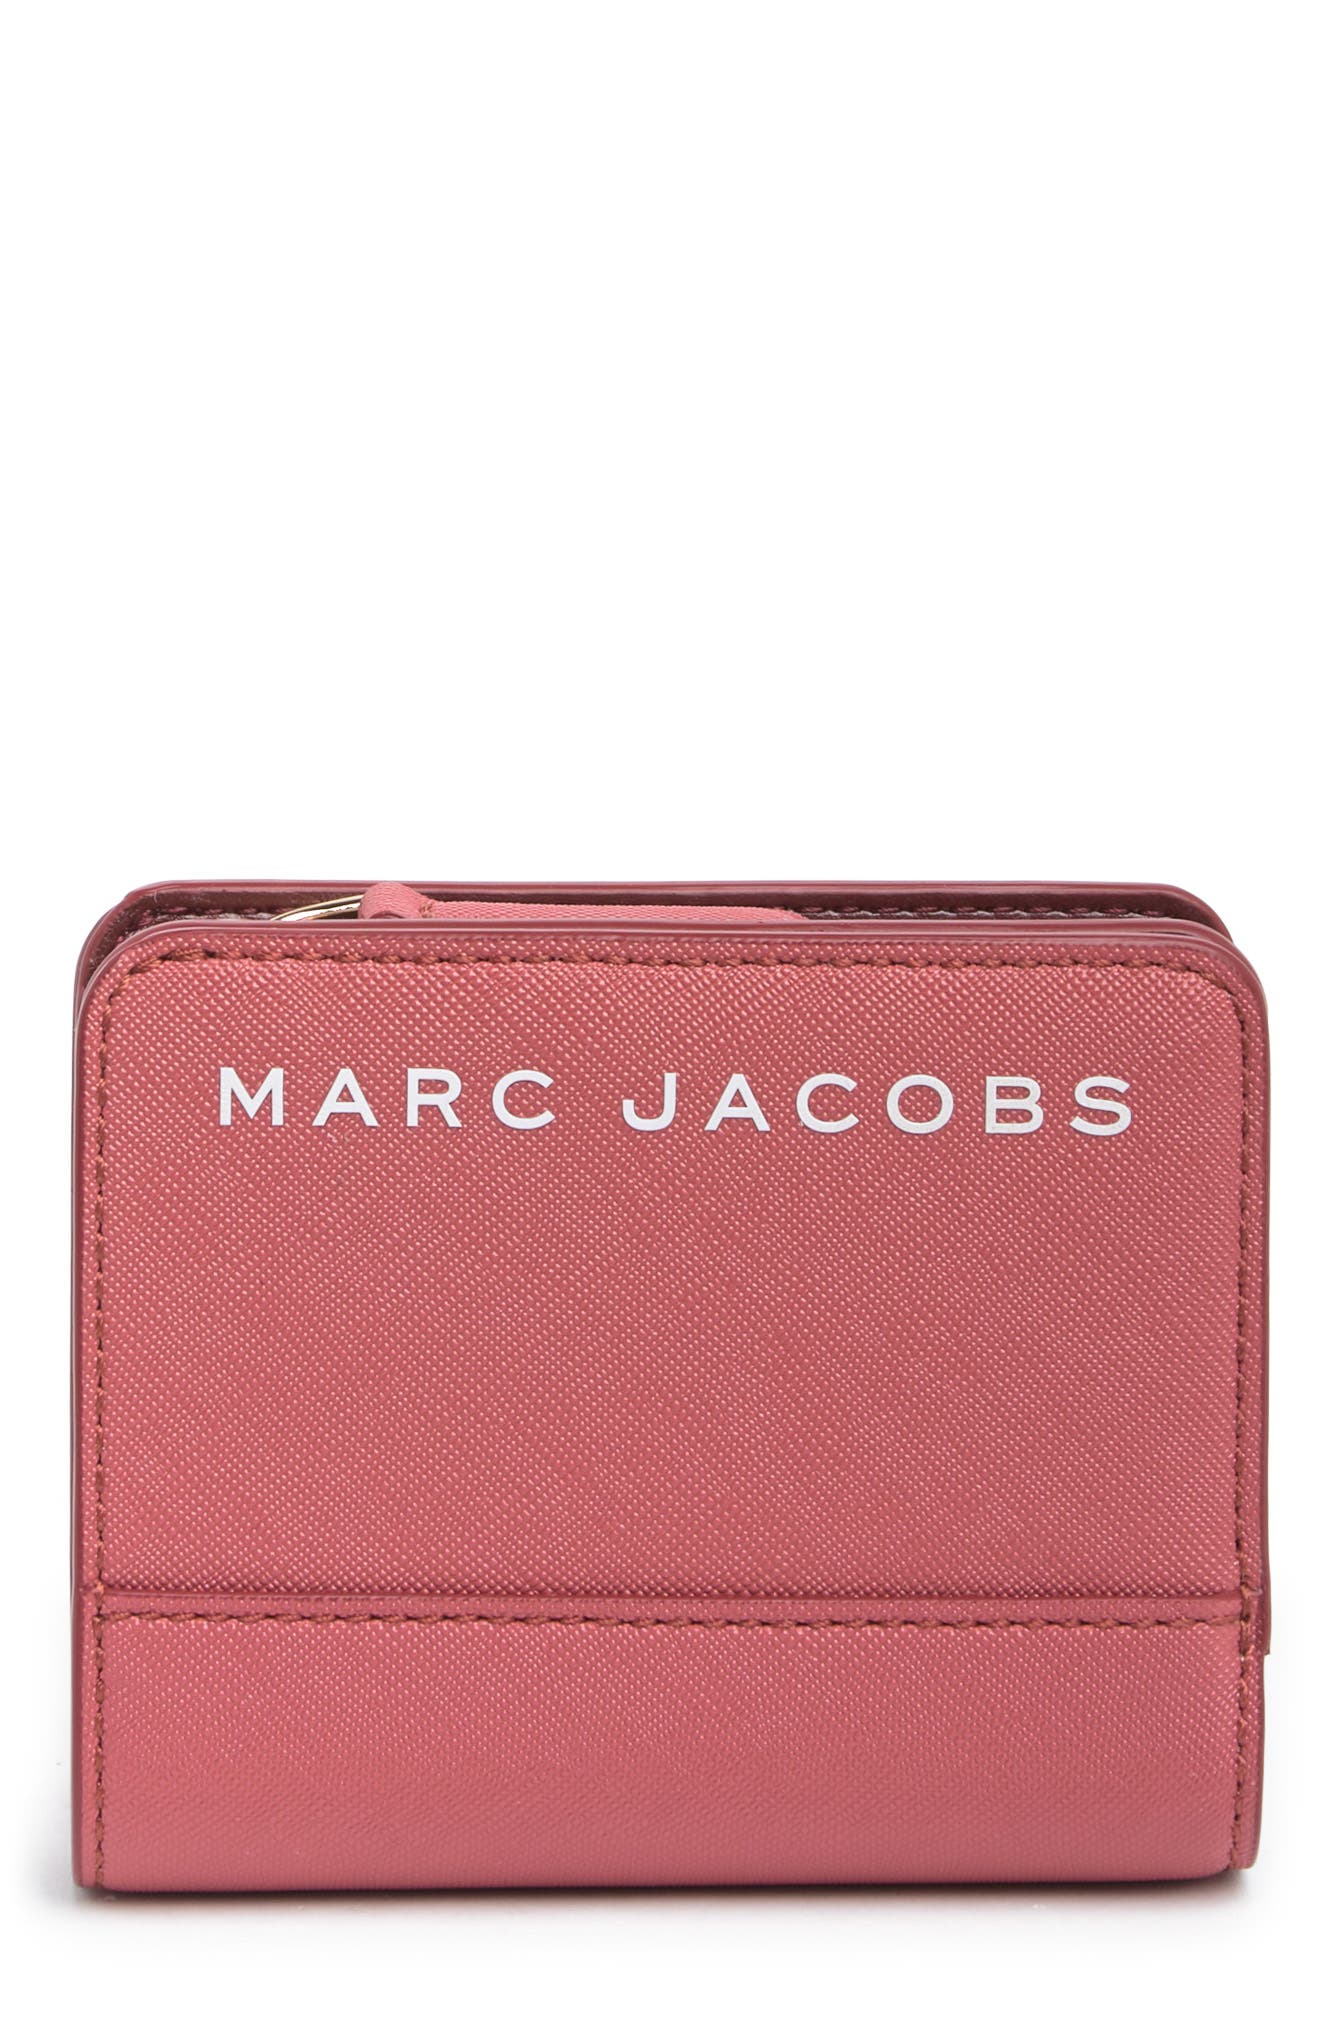 Marc Jacobs Branded Saffiano Leather Mini Wallet In Black | ModeSens